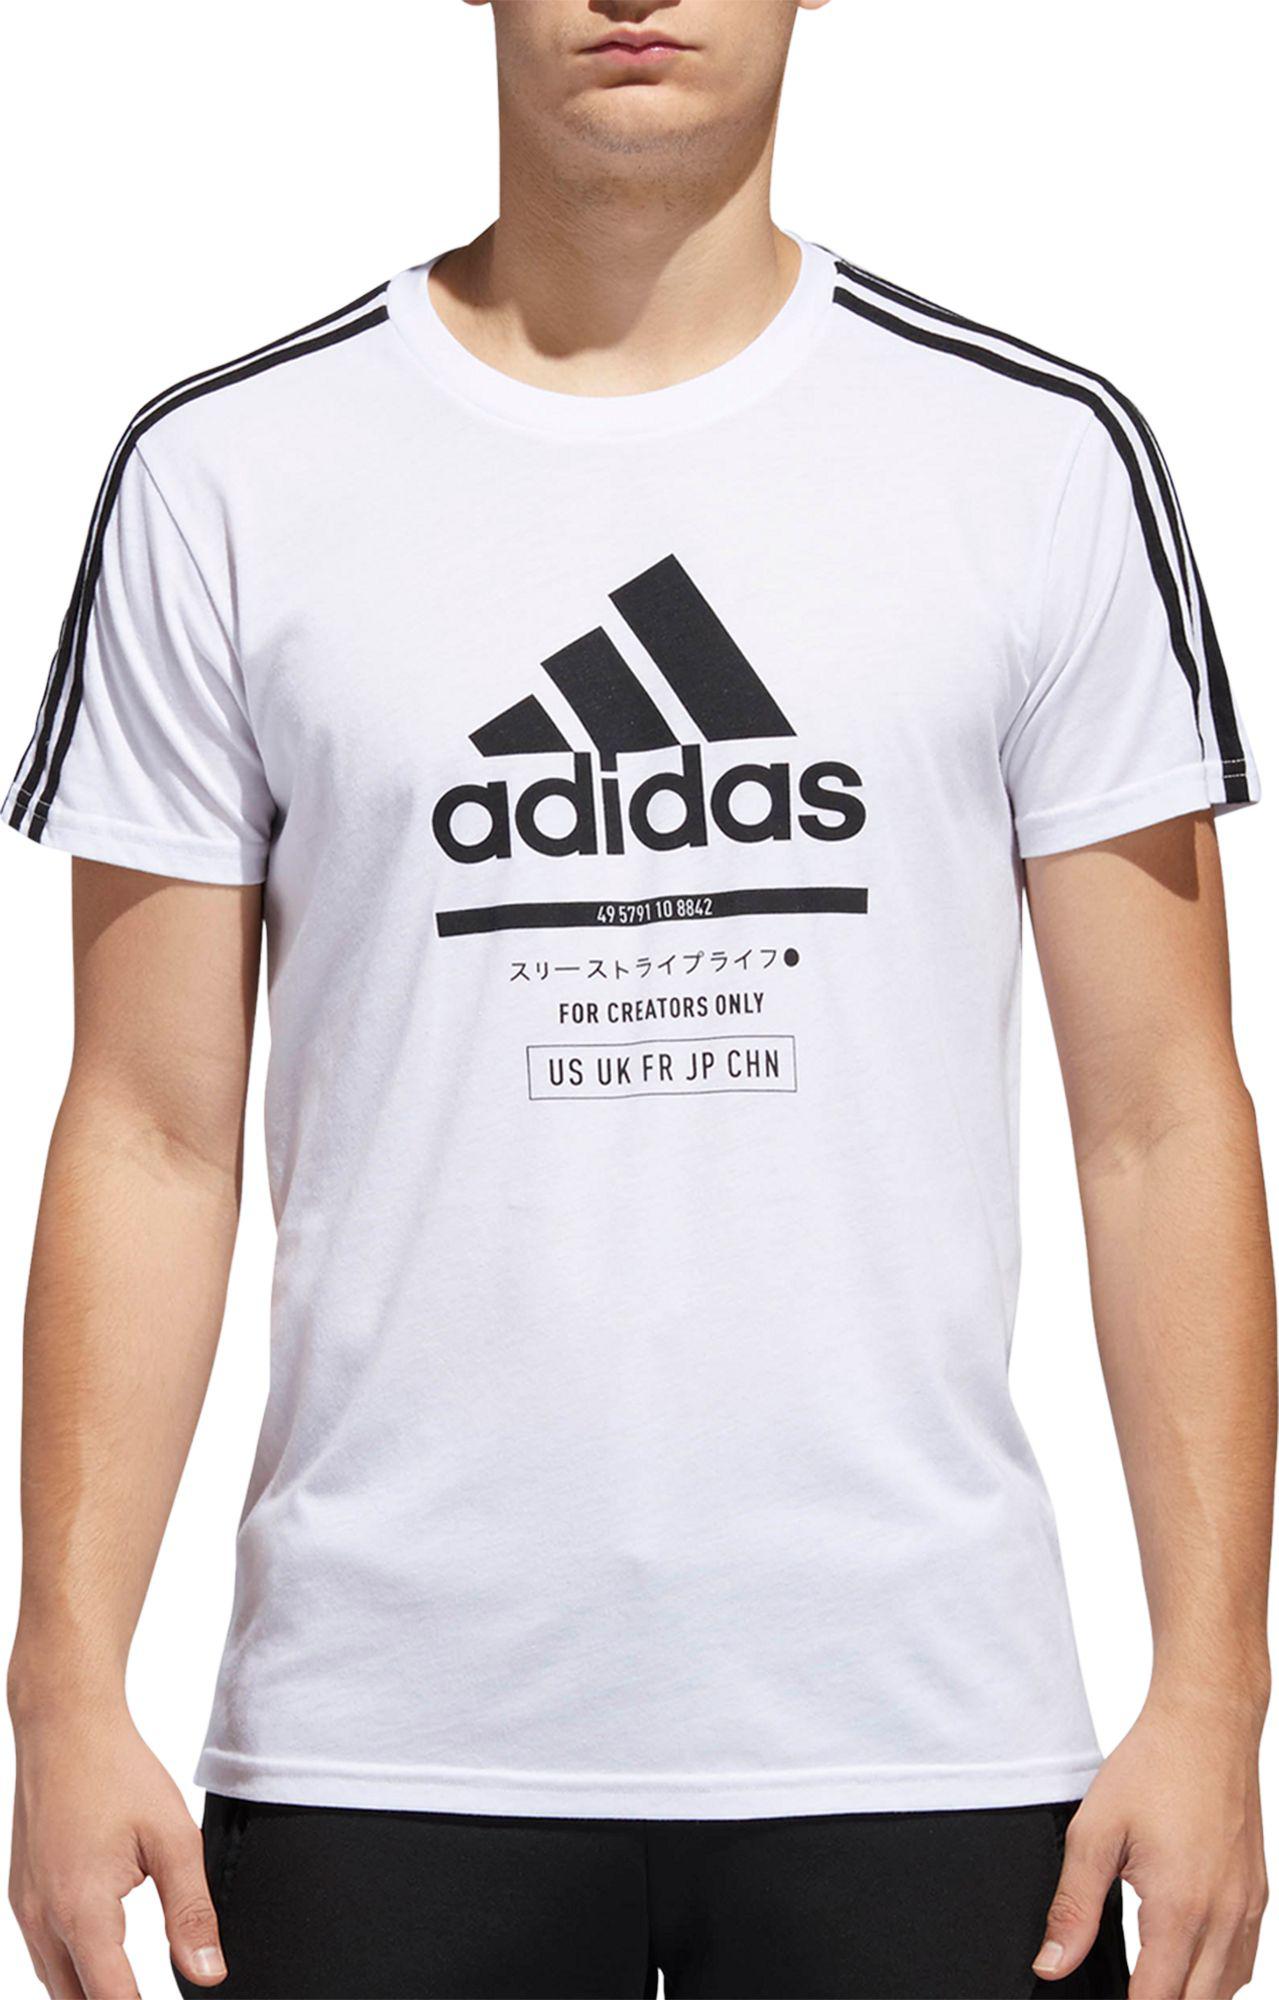 adidas for creators only shirt